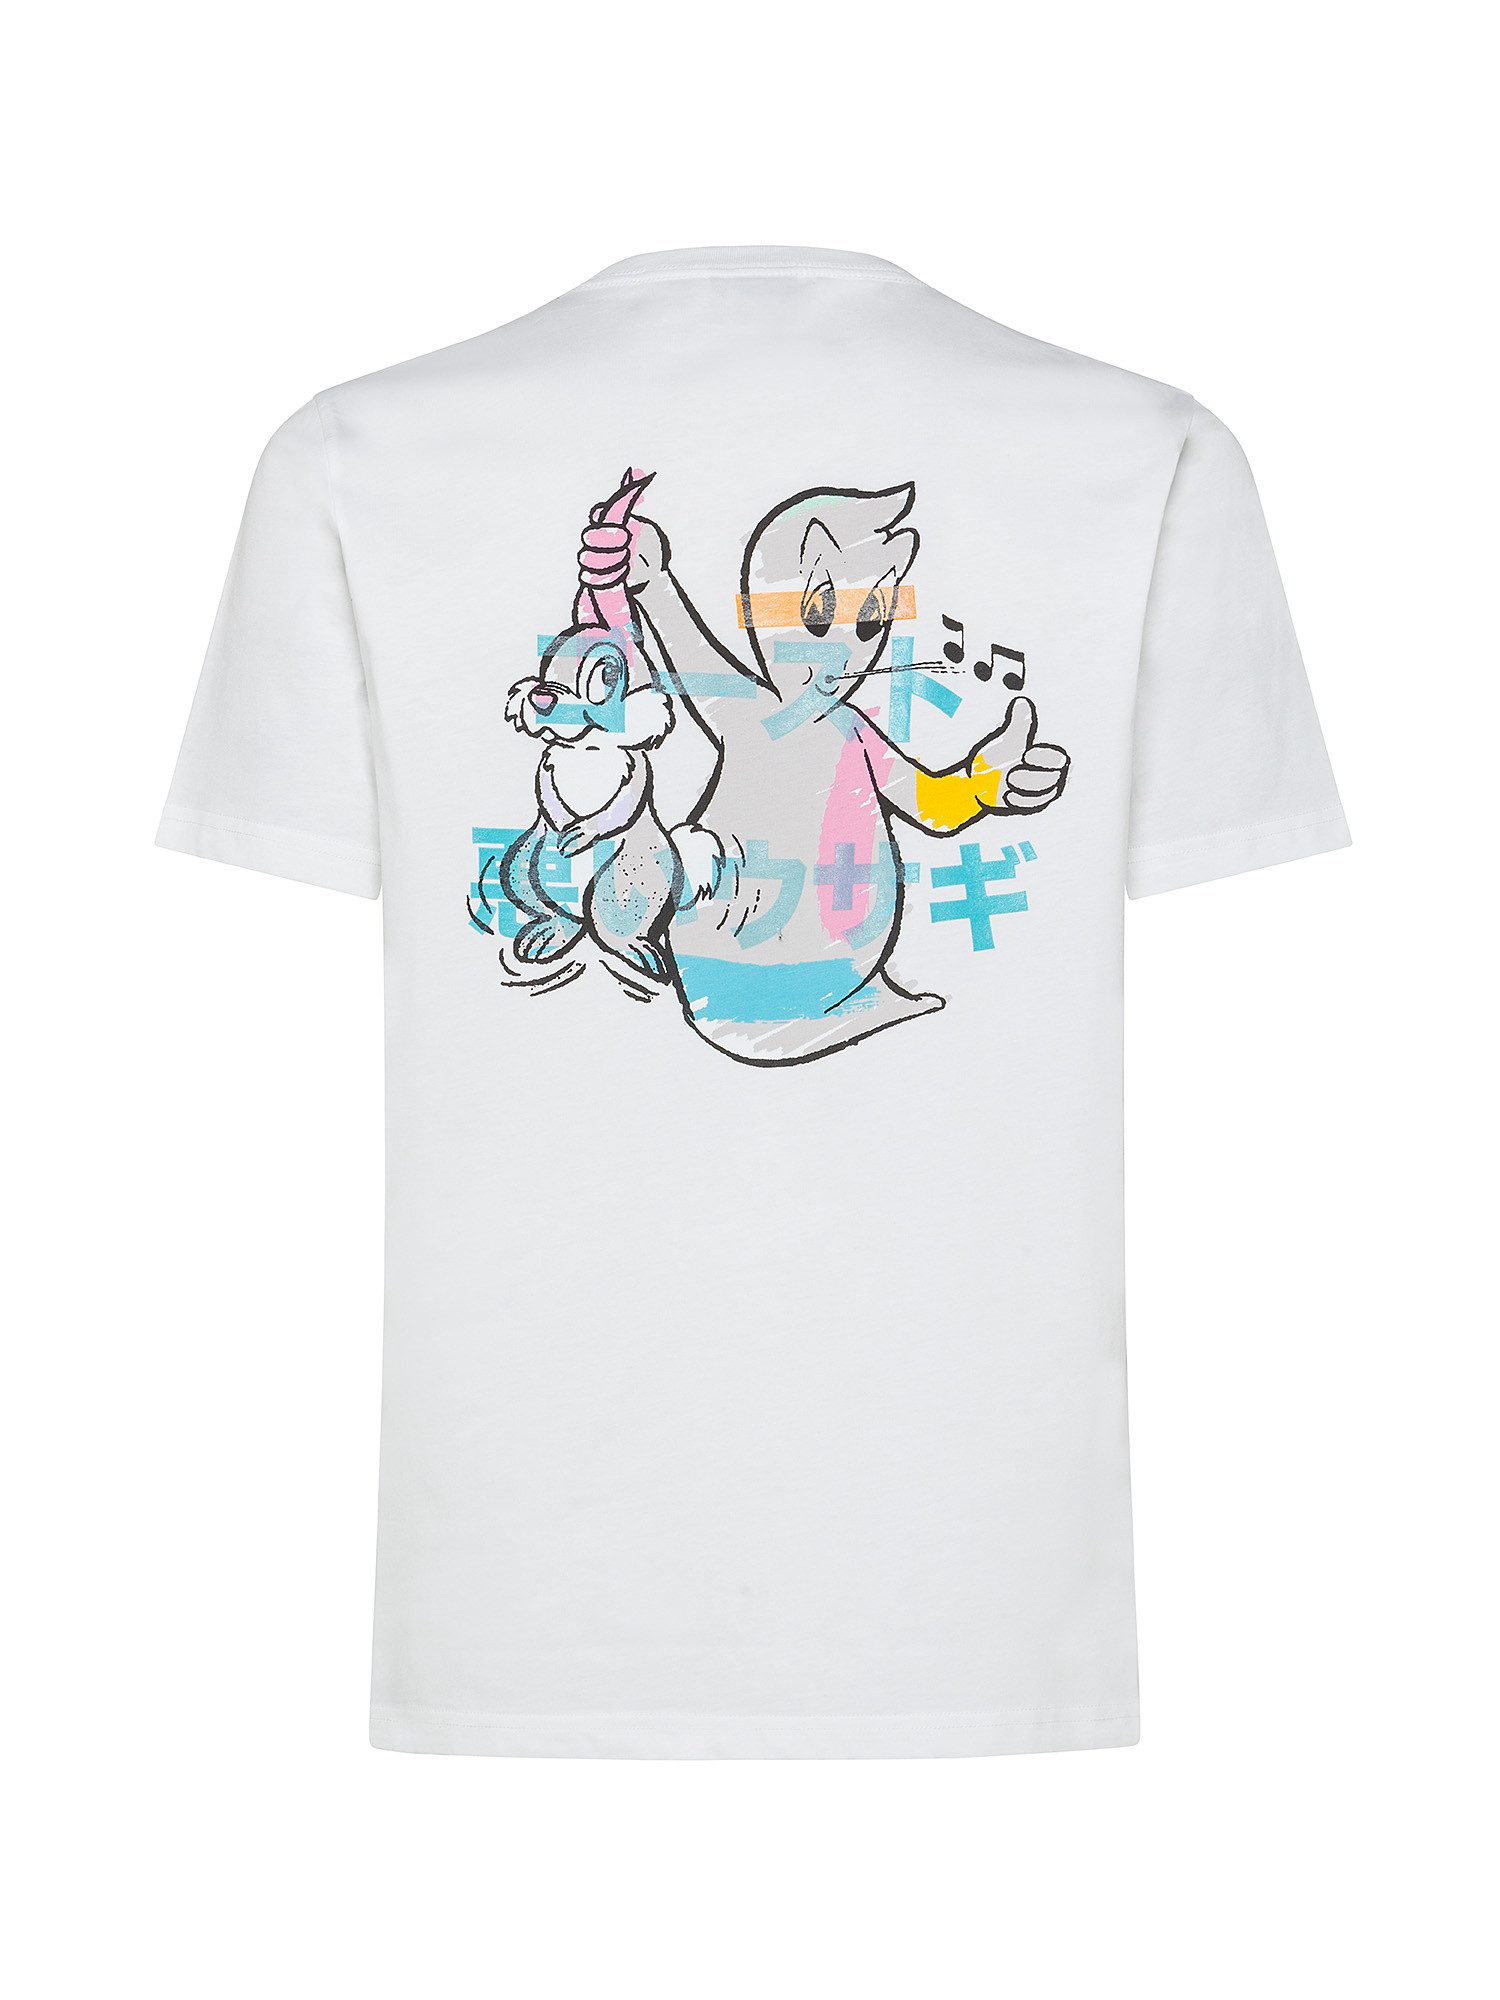 Paul Smith - T-shirt in cotone con stampa fantasma, Bianco, large image number 1